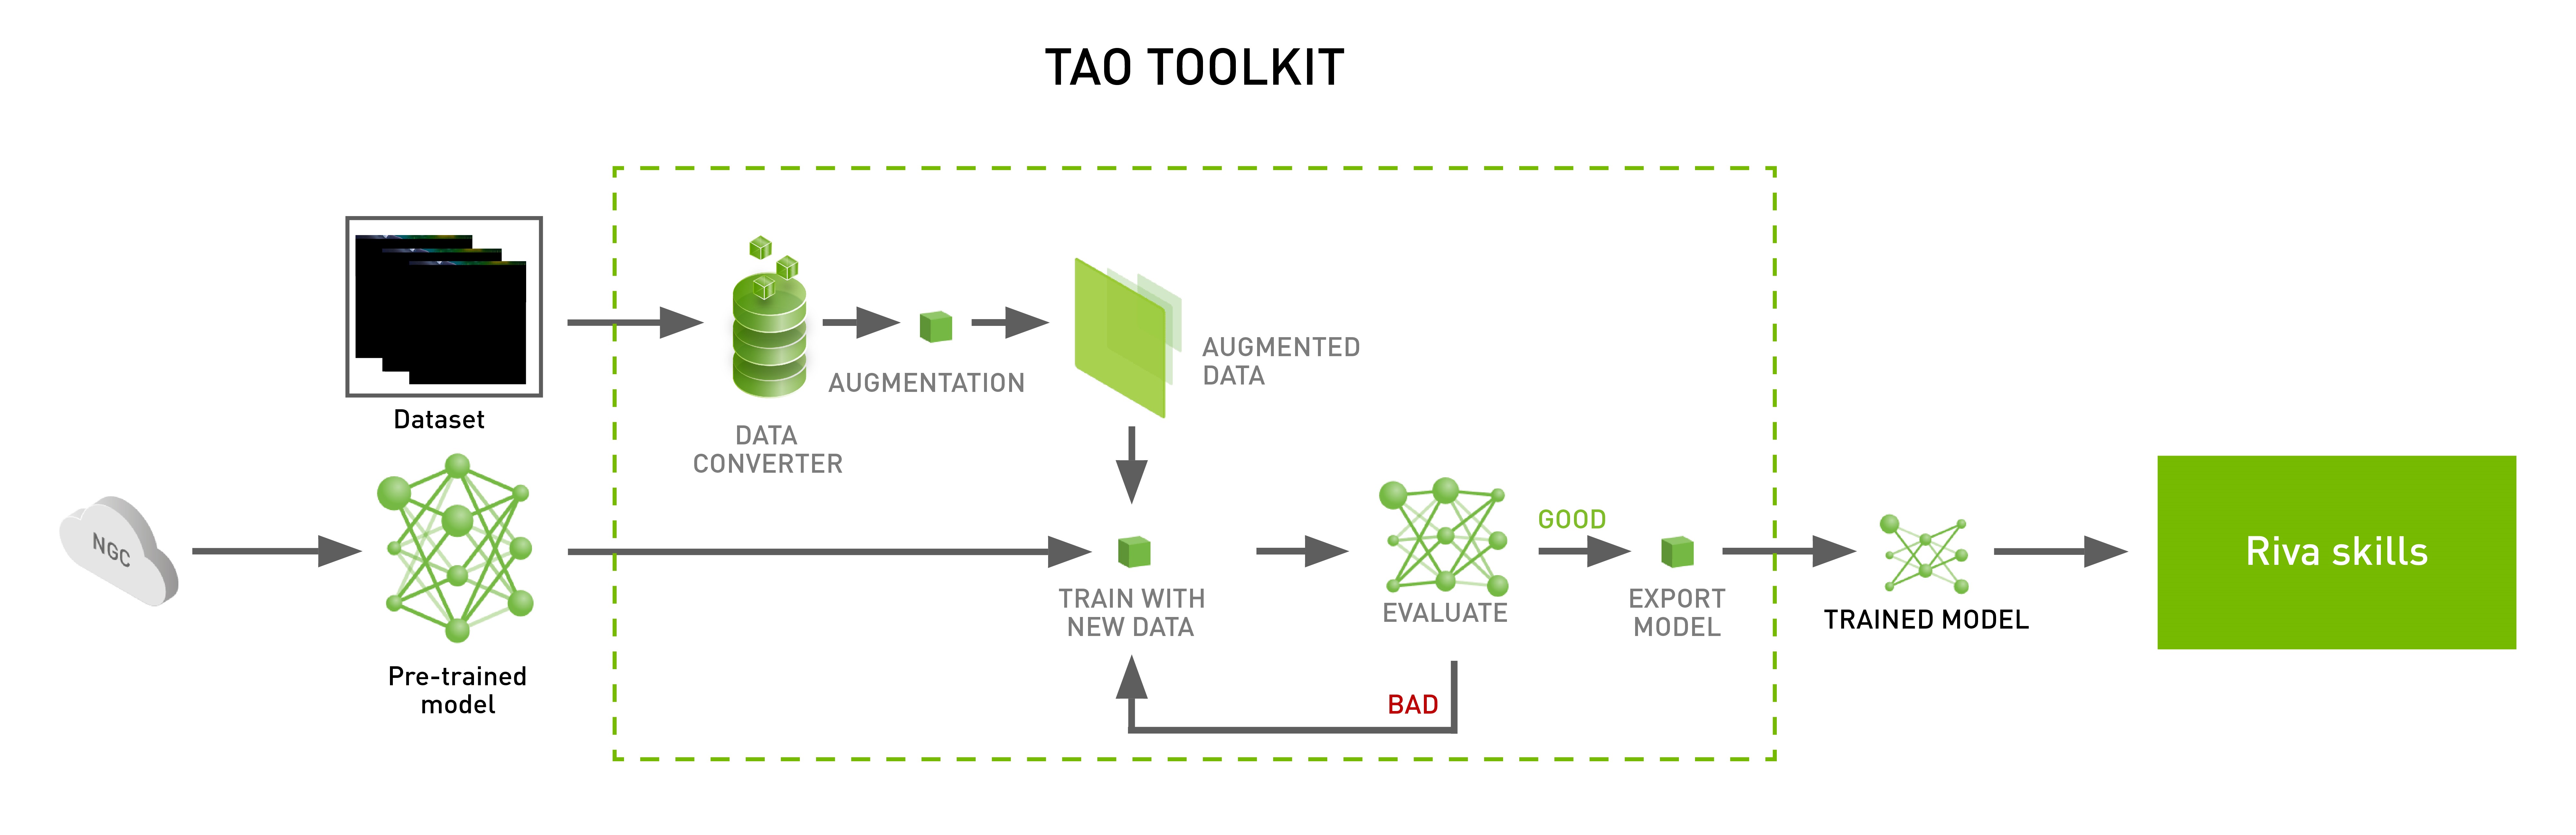 Diagram shows the workflow of TAO toolkit starting from NGC pretrained model to adding your custom data and deploying it as a Riva skill.